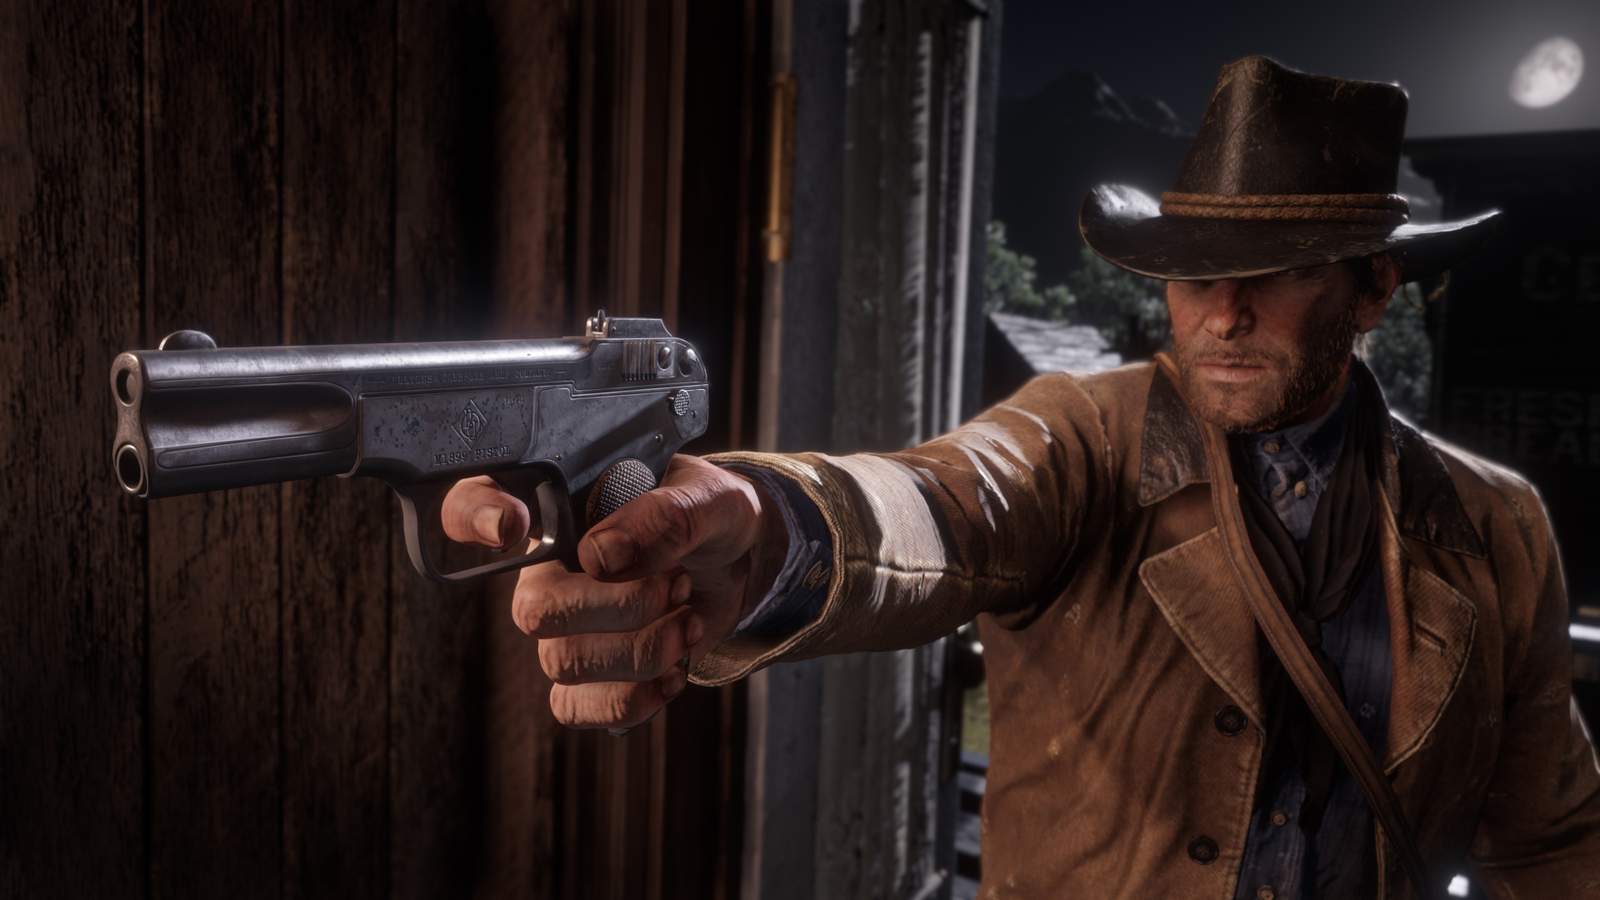 Red Dead Redemption II is coming to PC, but Steam has to wait